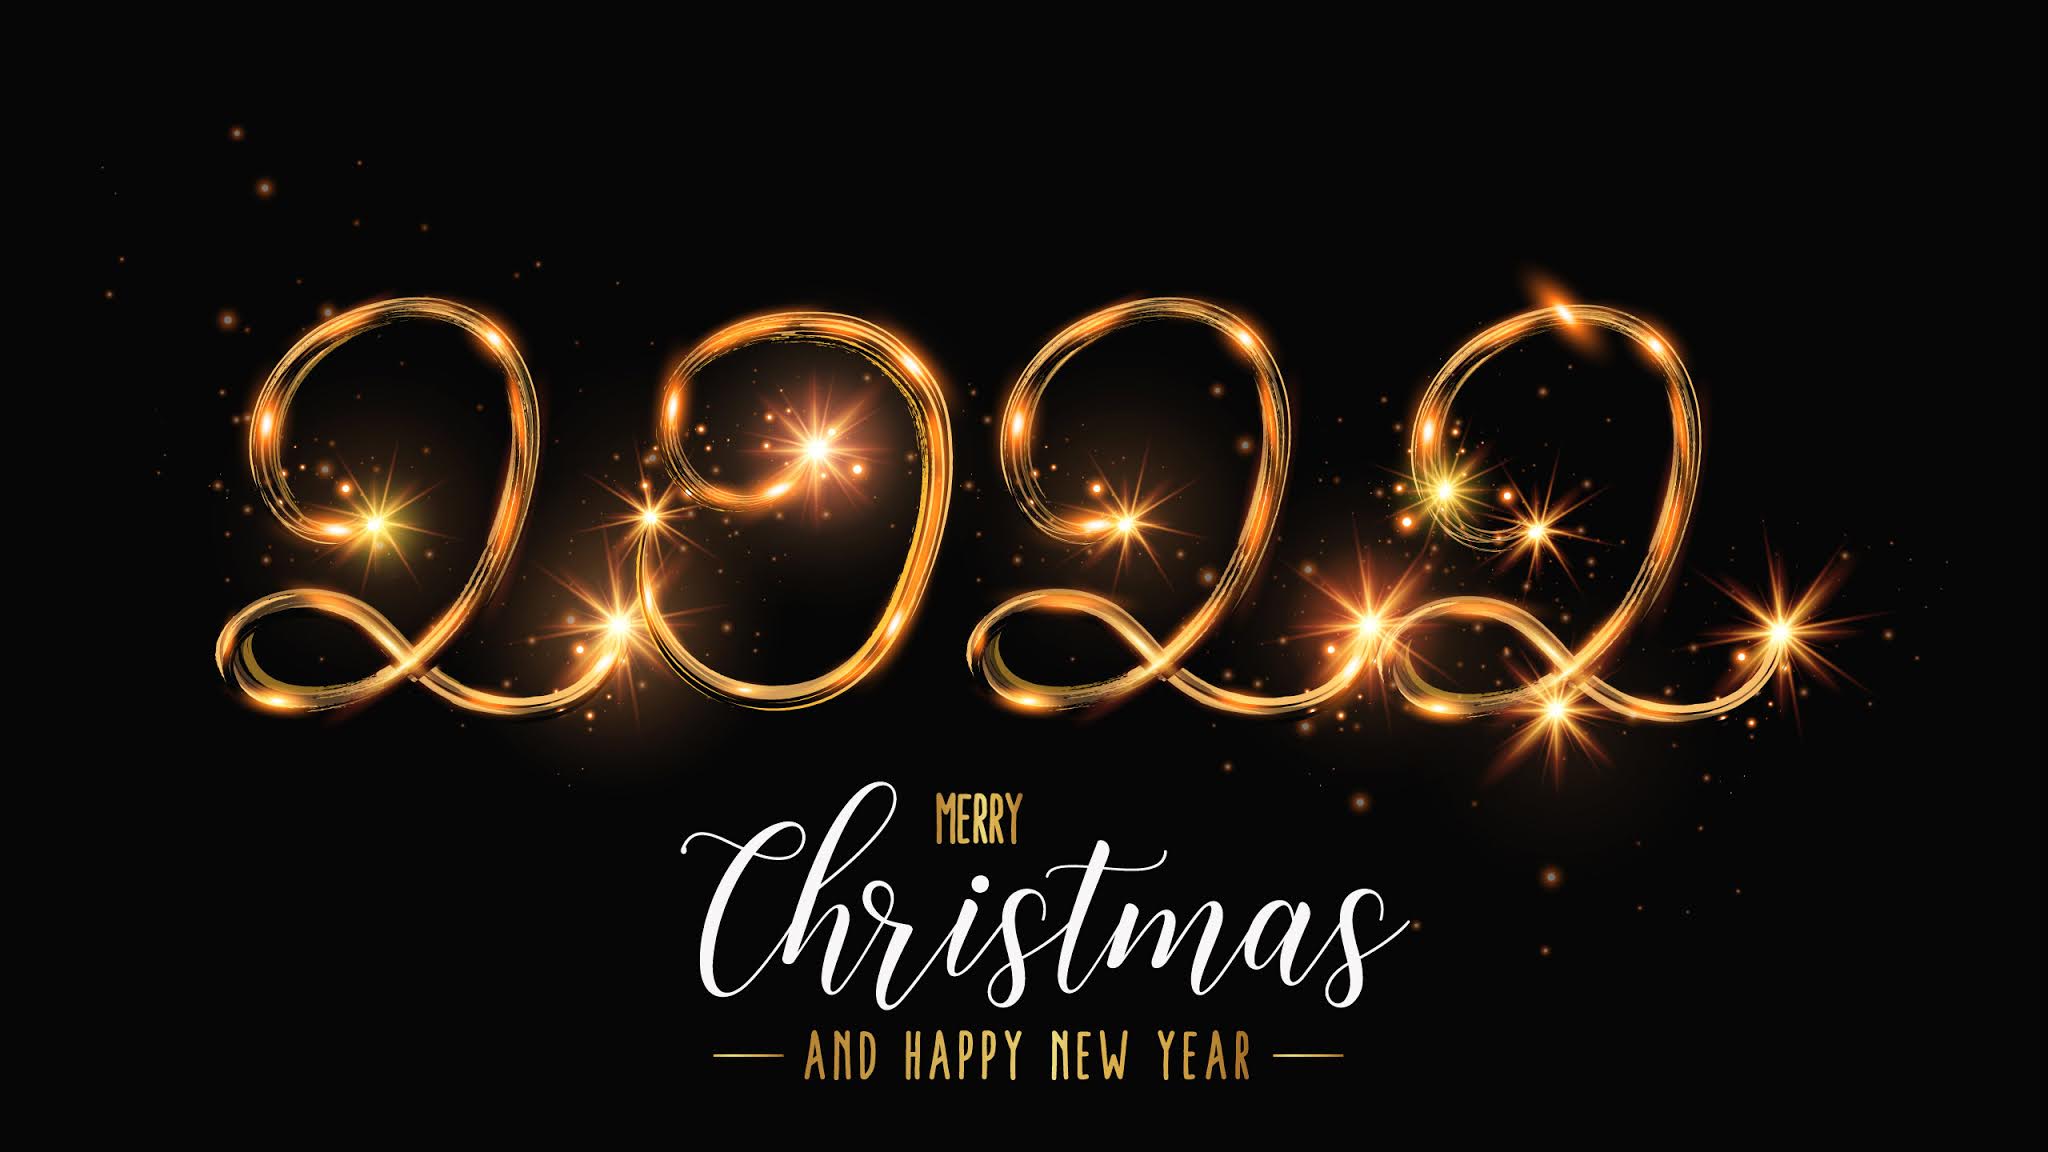 2022 Merry Christmas And Happy New Year